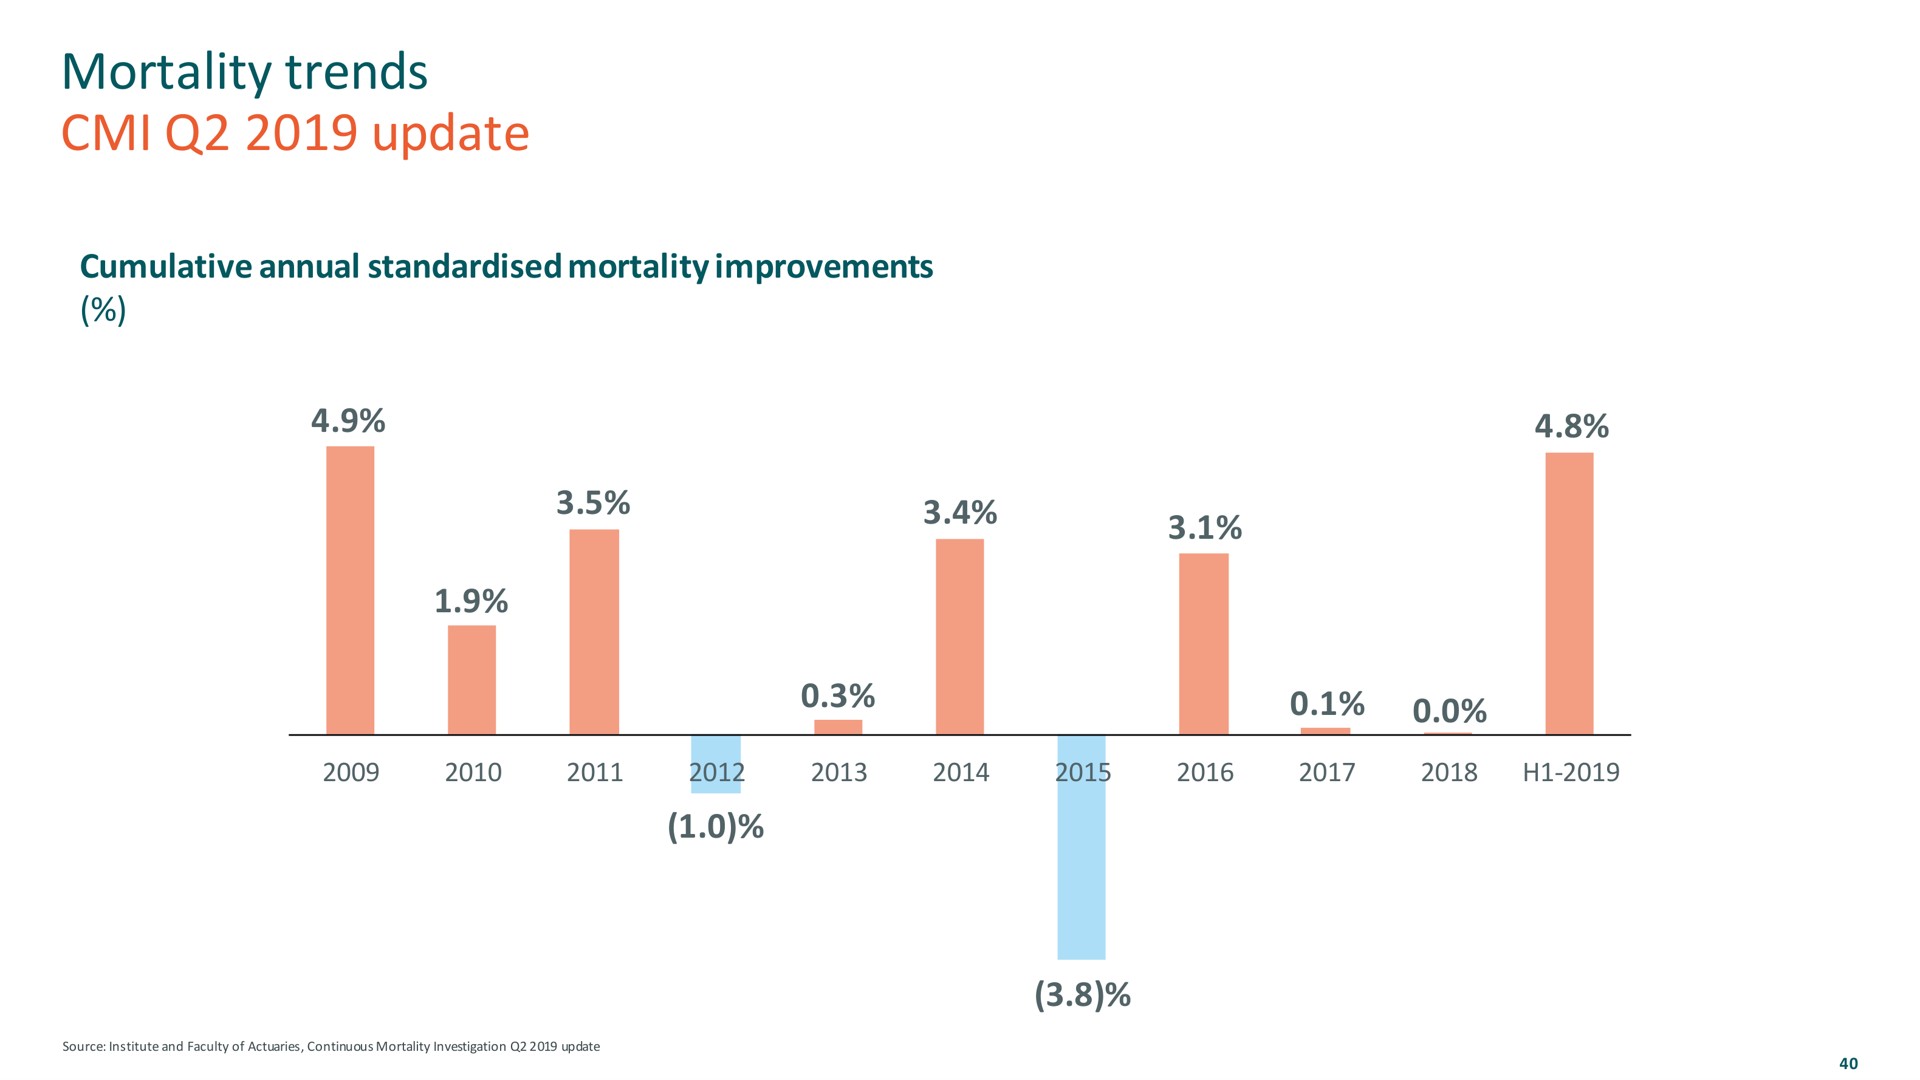 mortality trends update | M&G